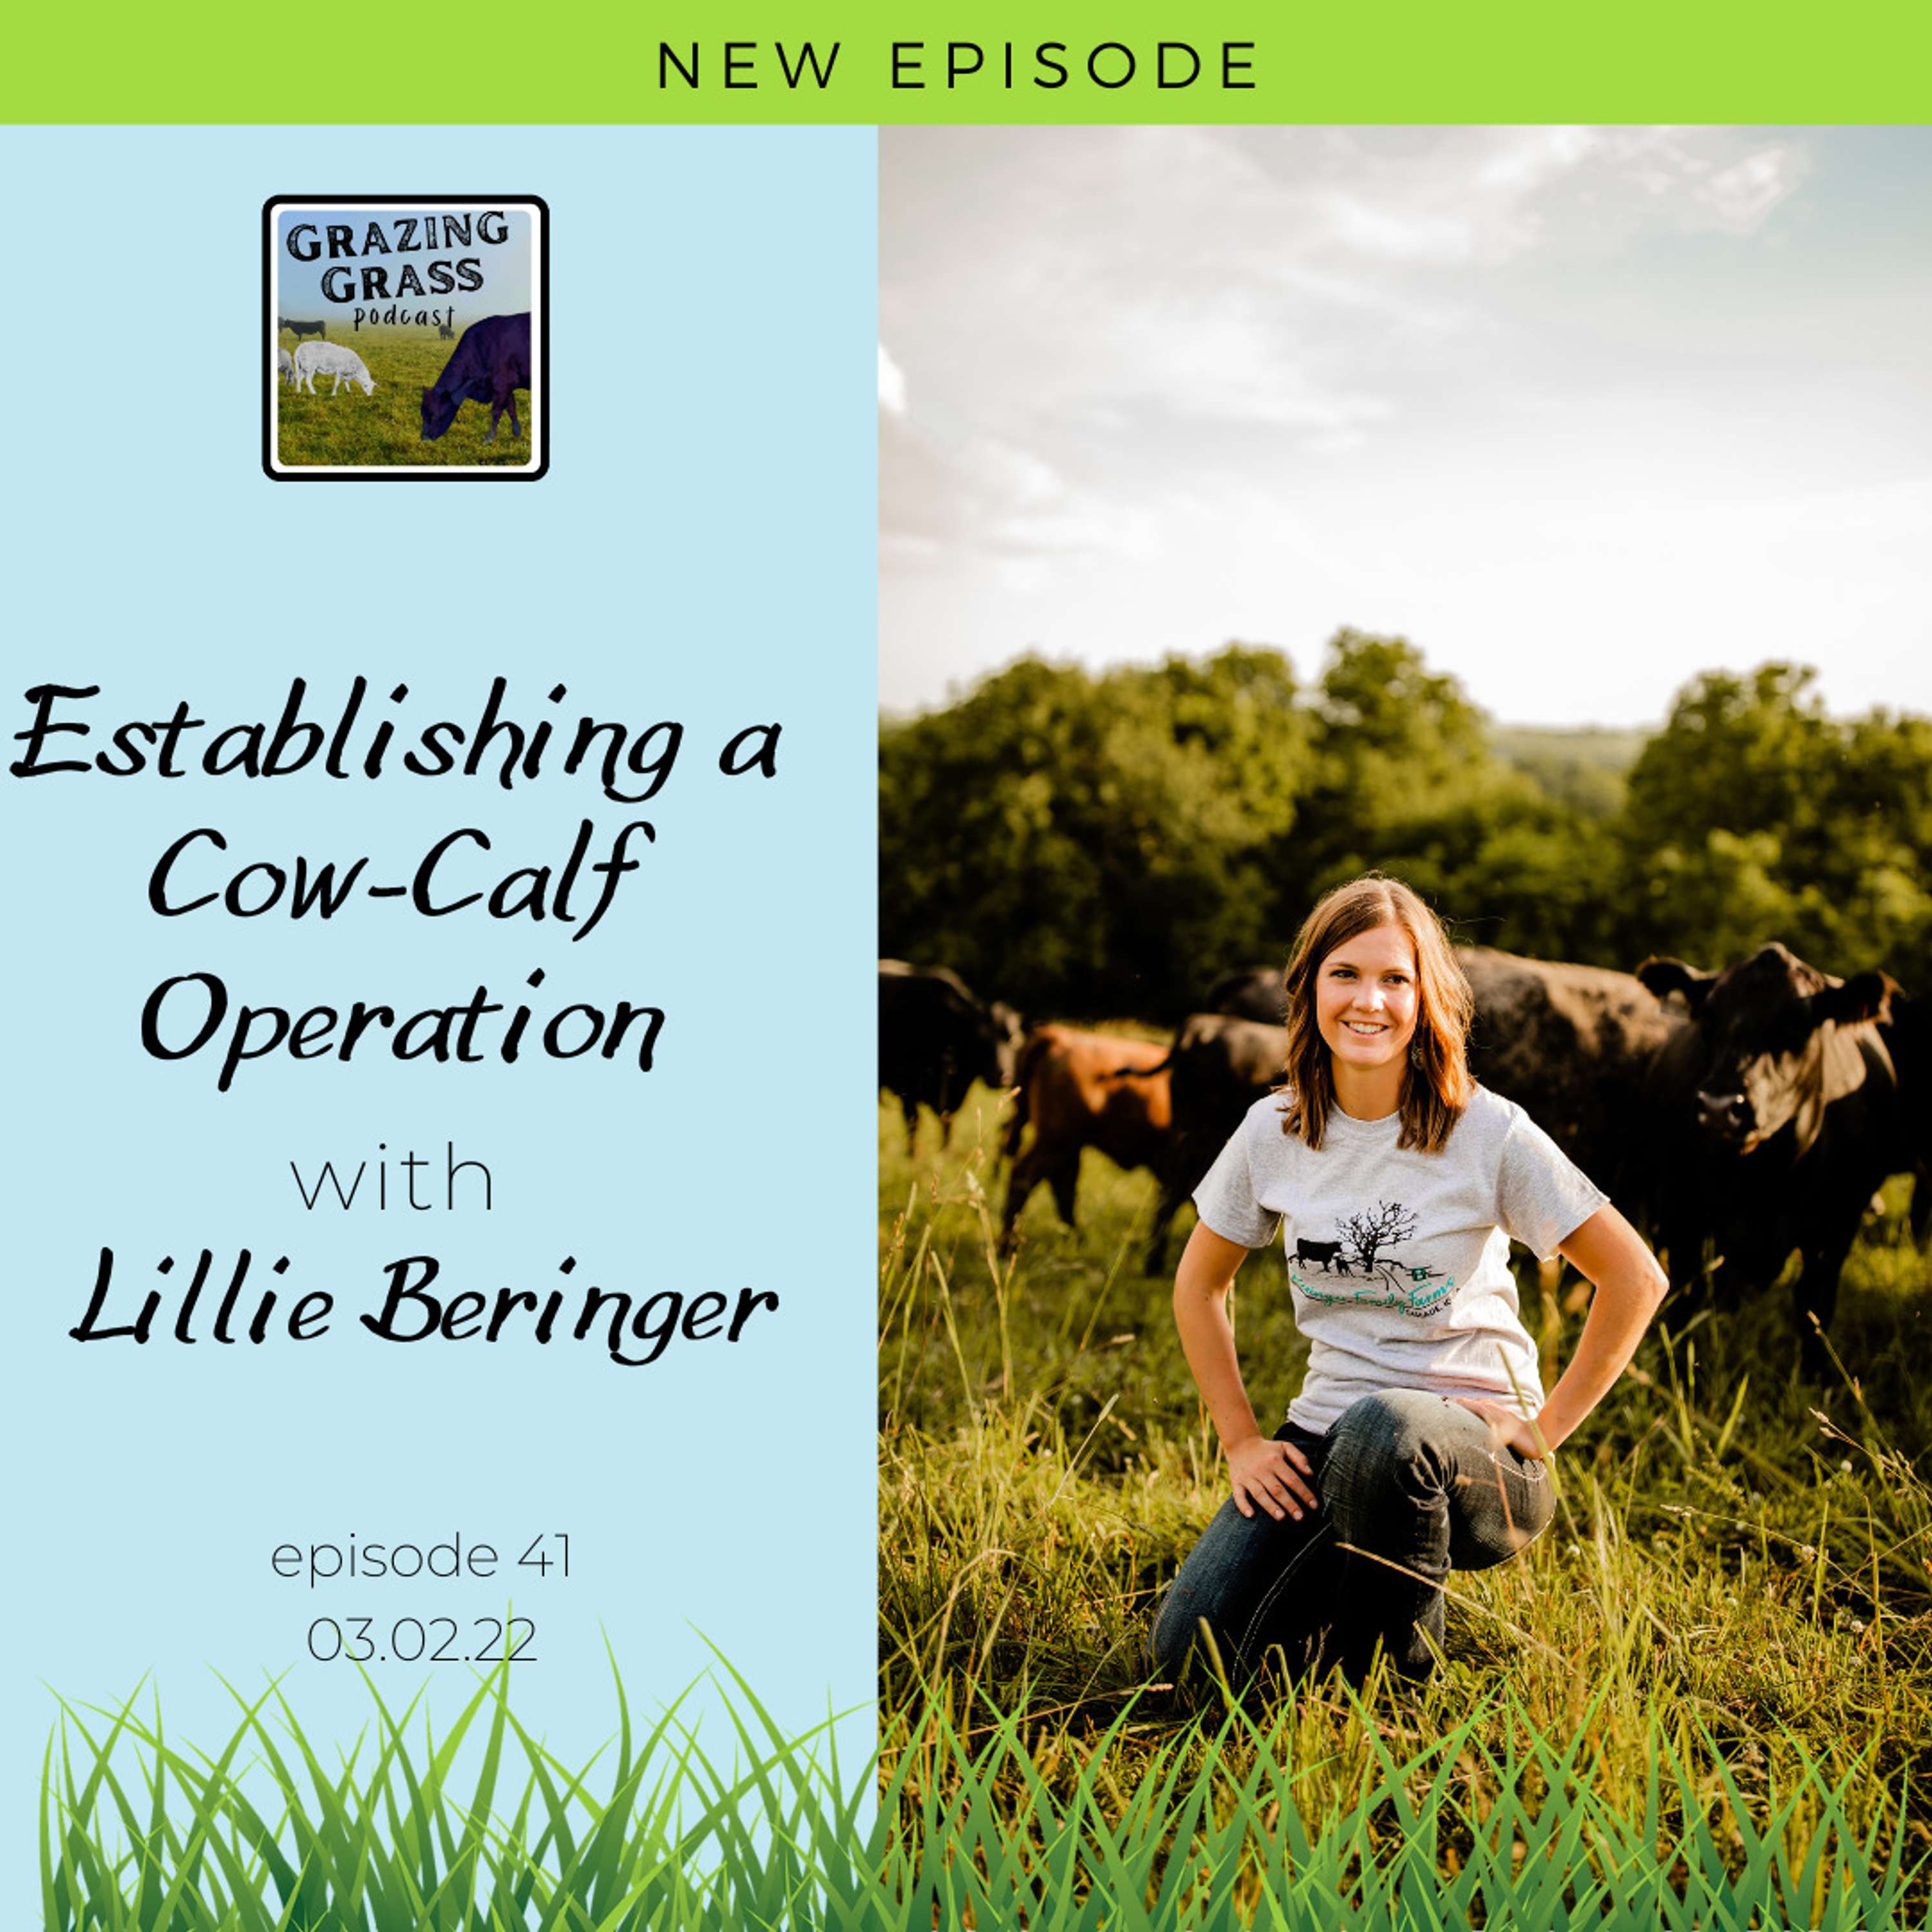 e41. Establishing a Cow-Calf Operation with Lillie Beringer